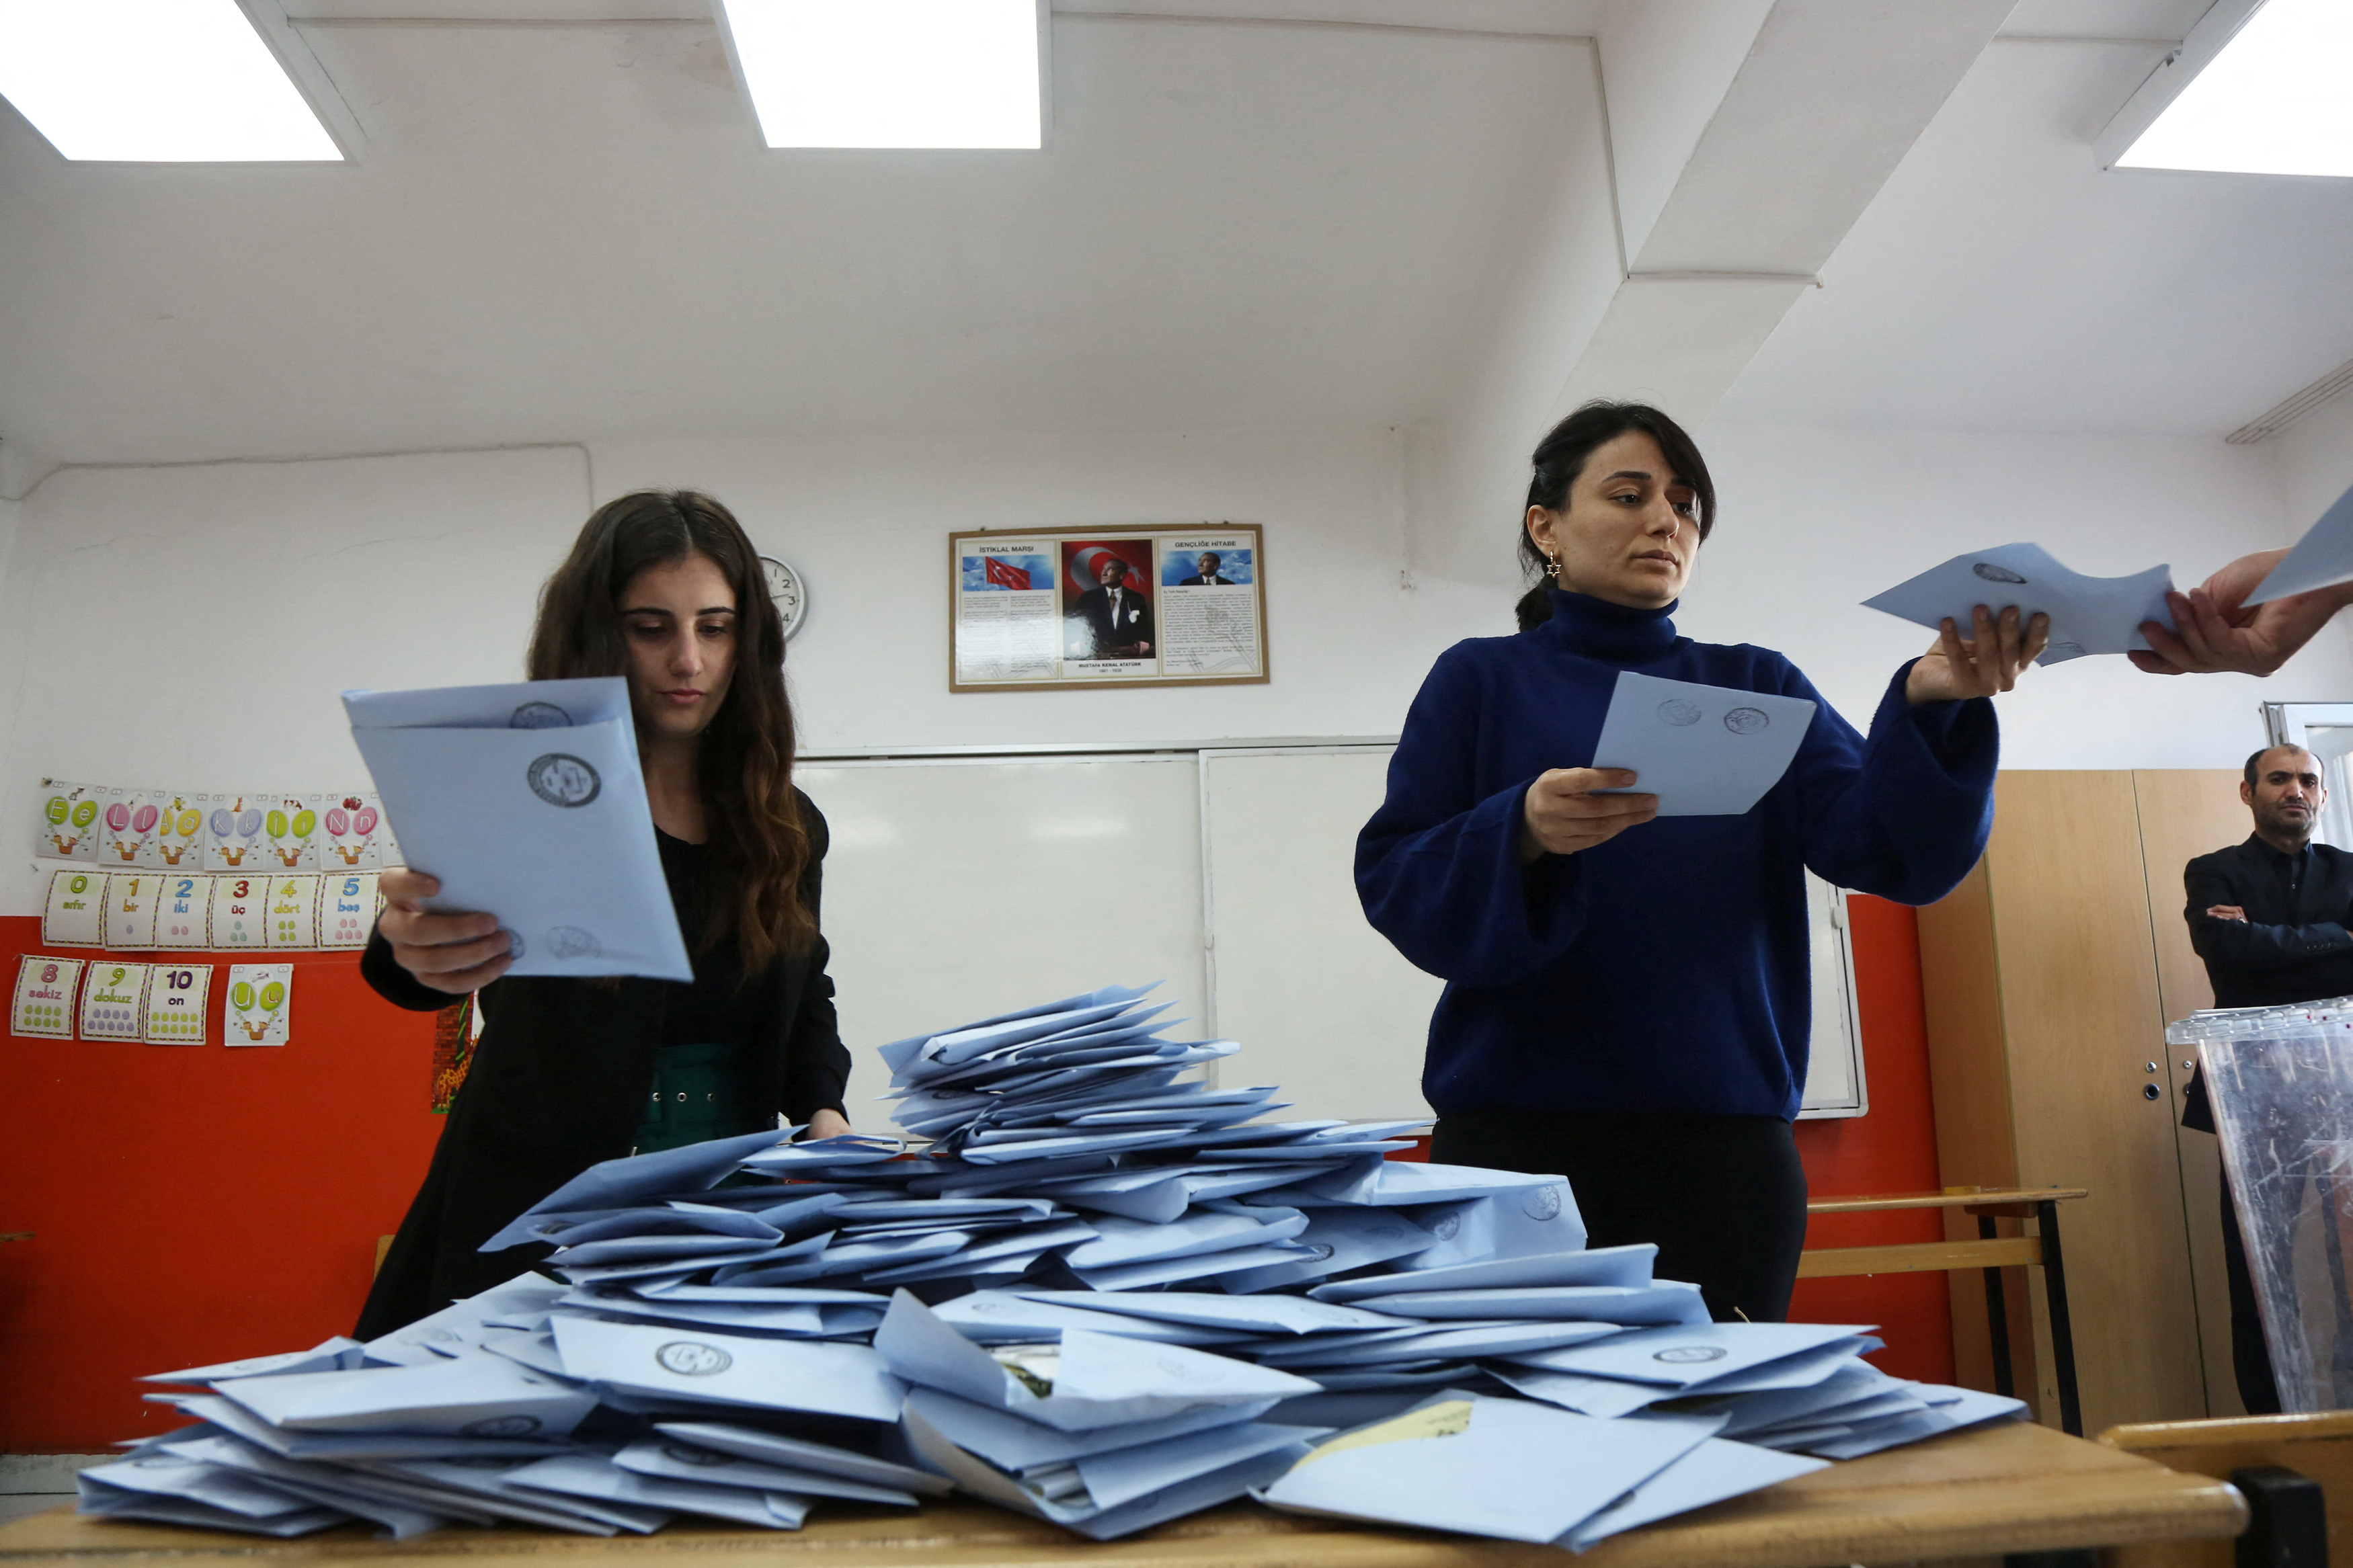 Election officials count ballots at a polling station during the local elections in Diyarbakir